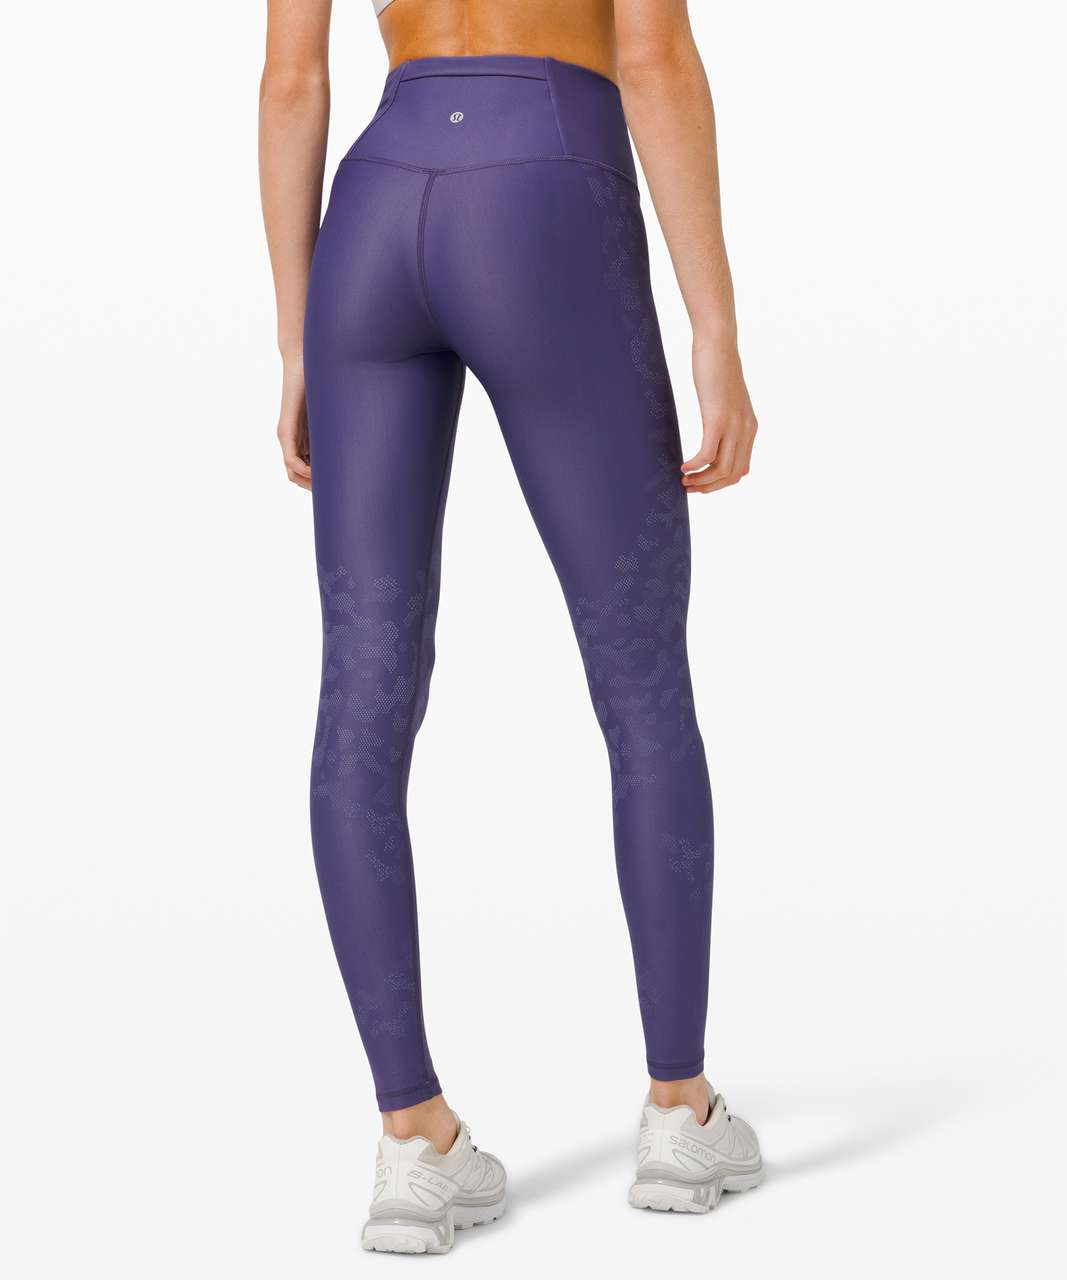 Lululemon Mapped Out High Rise Tight 28" *Camo - Midnight Orchid / Peri Purple